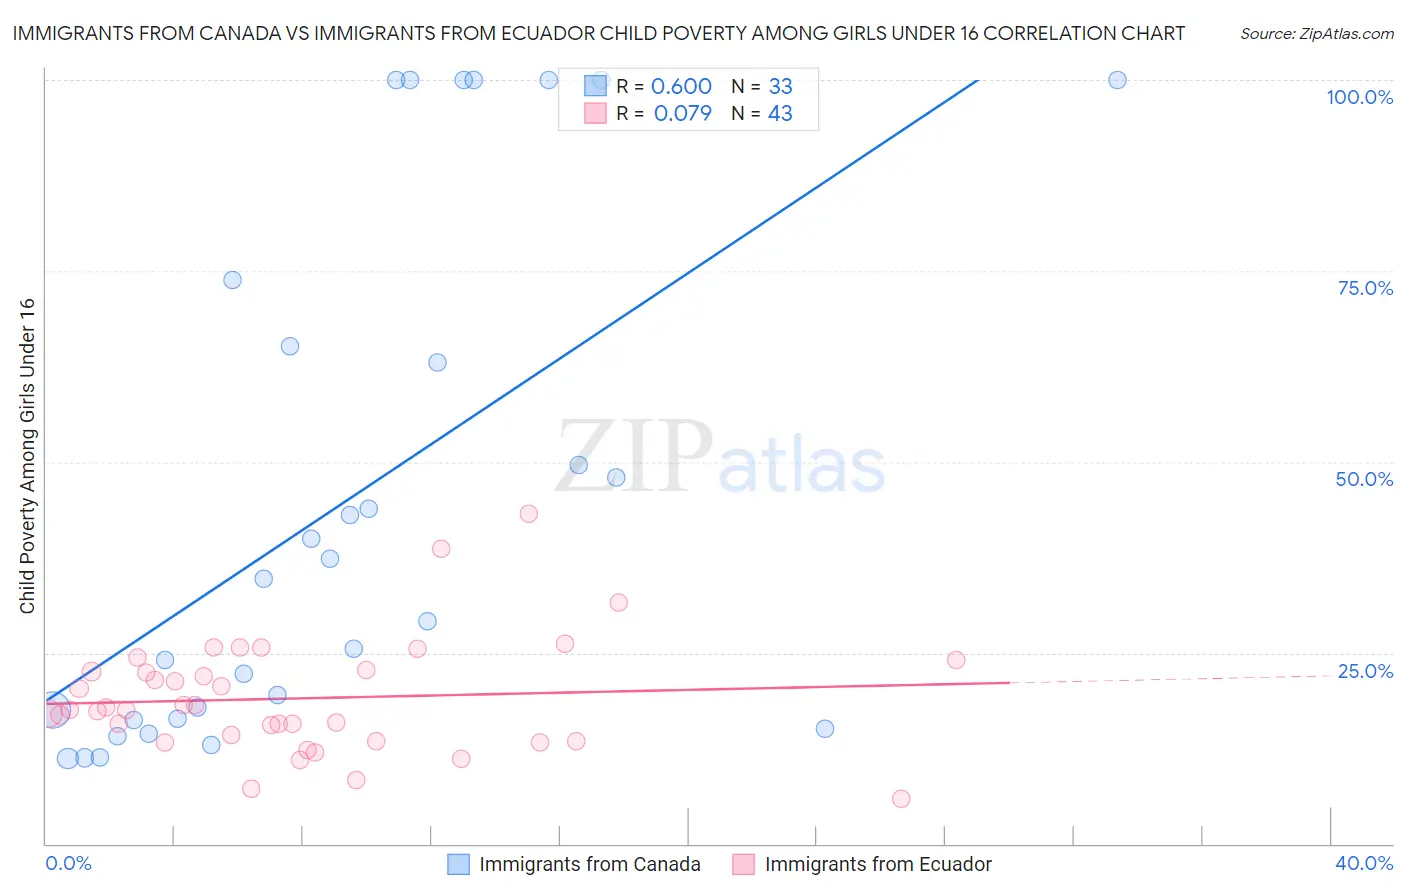 Immigrants from Canada vs Immigrants from Ecuador Child Poverty Among Girls Under 16